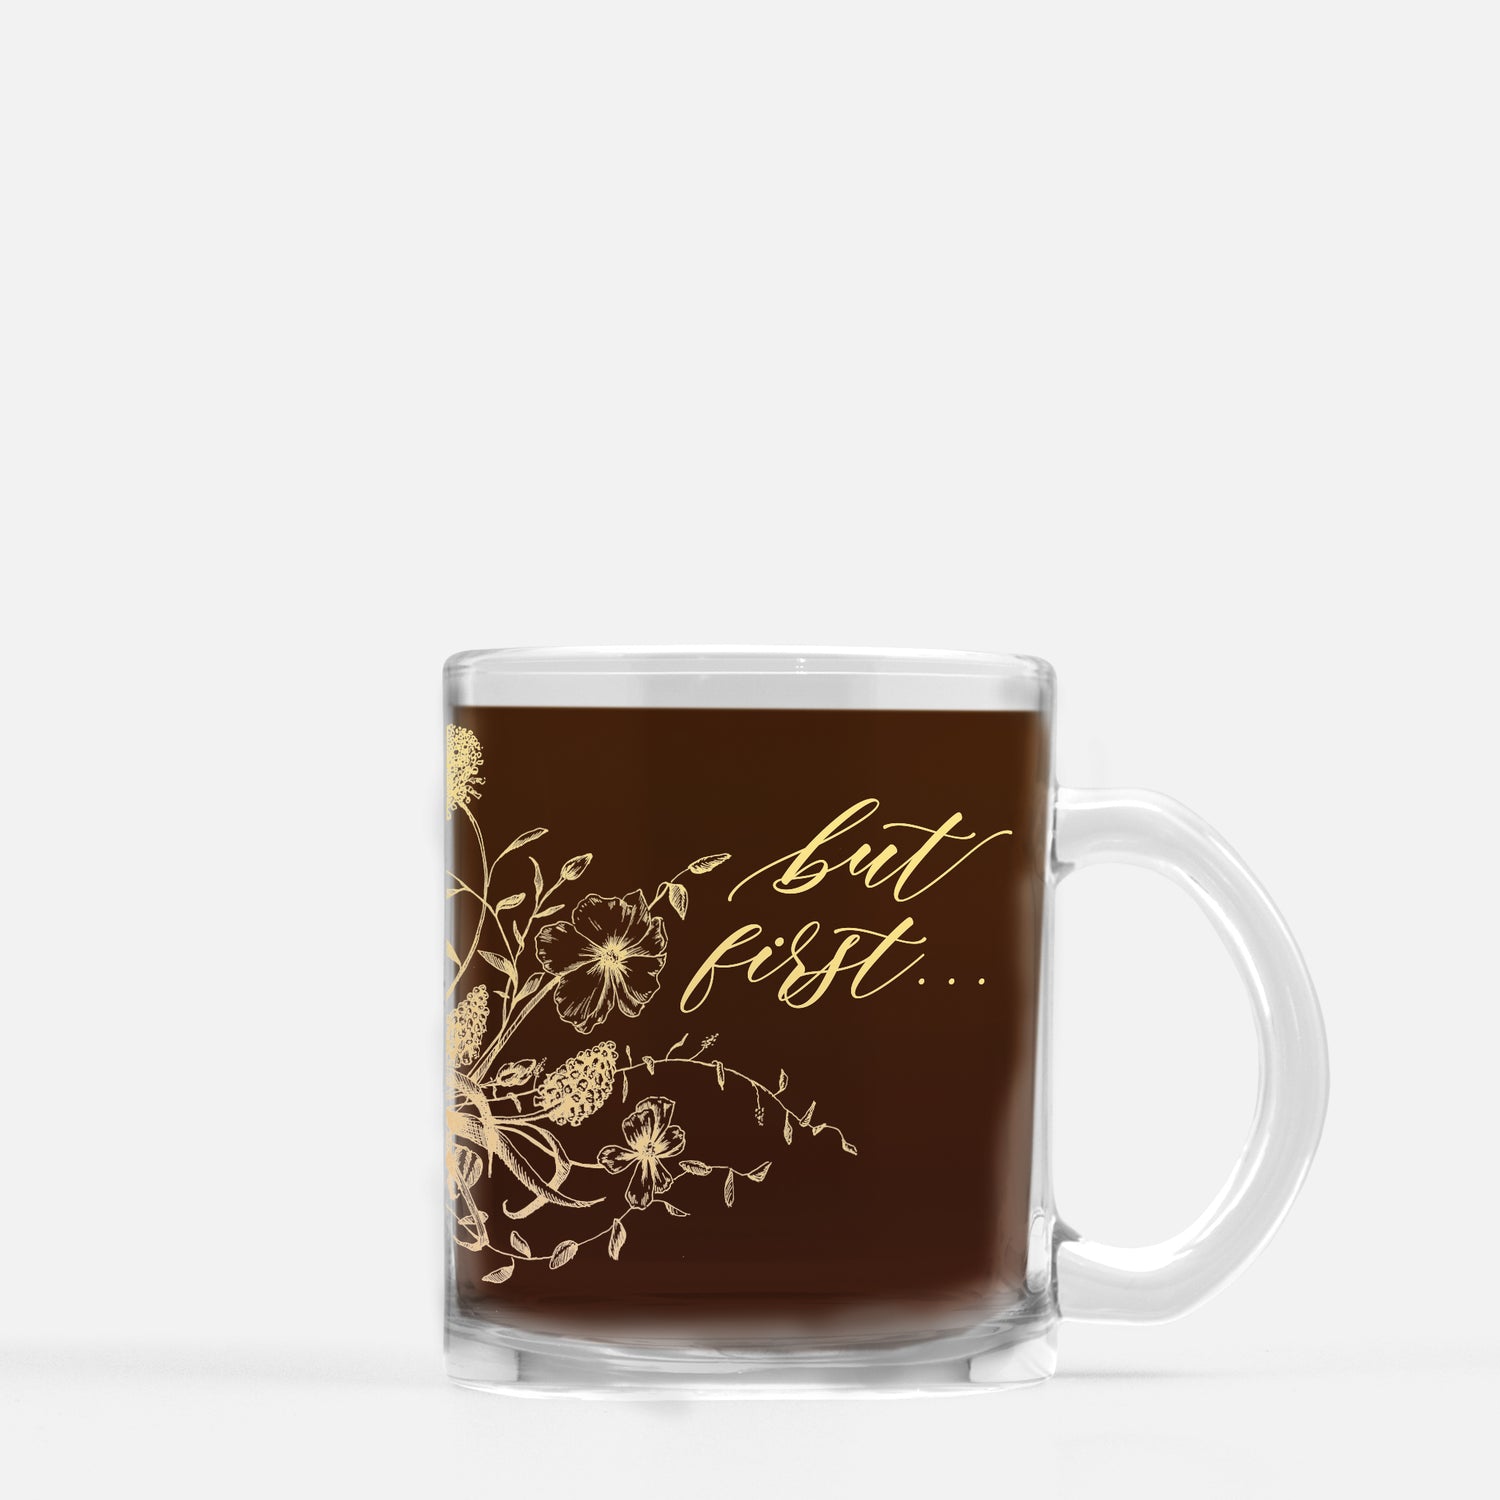 Gold ink on clear glass mug with flowers and that says "but first..." by Rust Belt Love